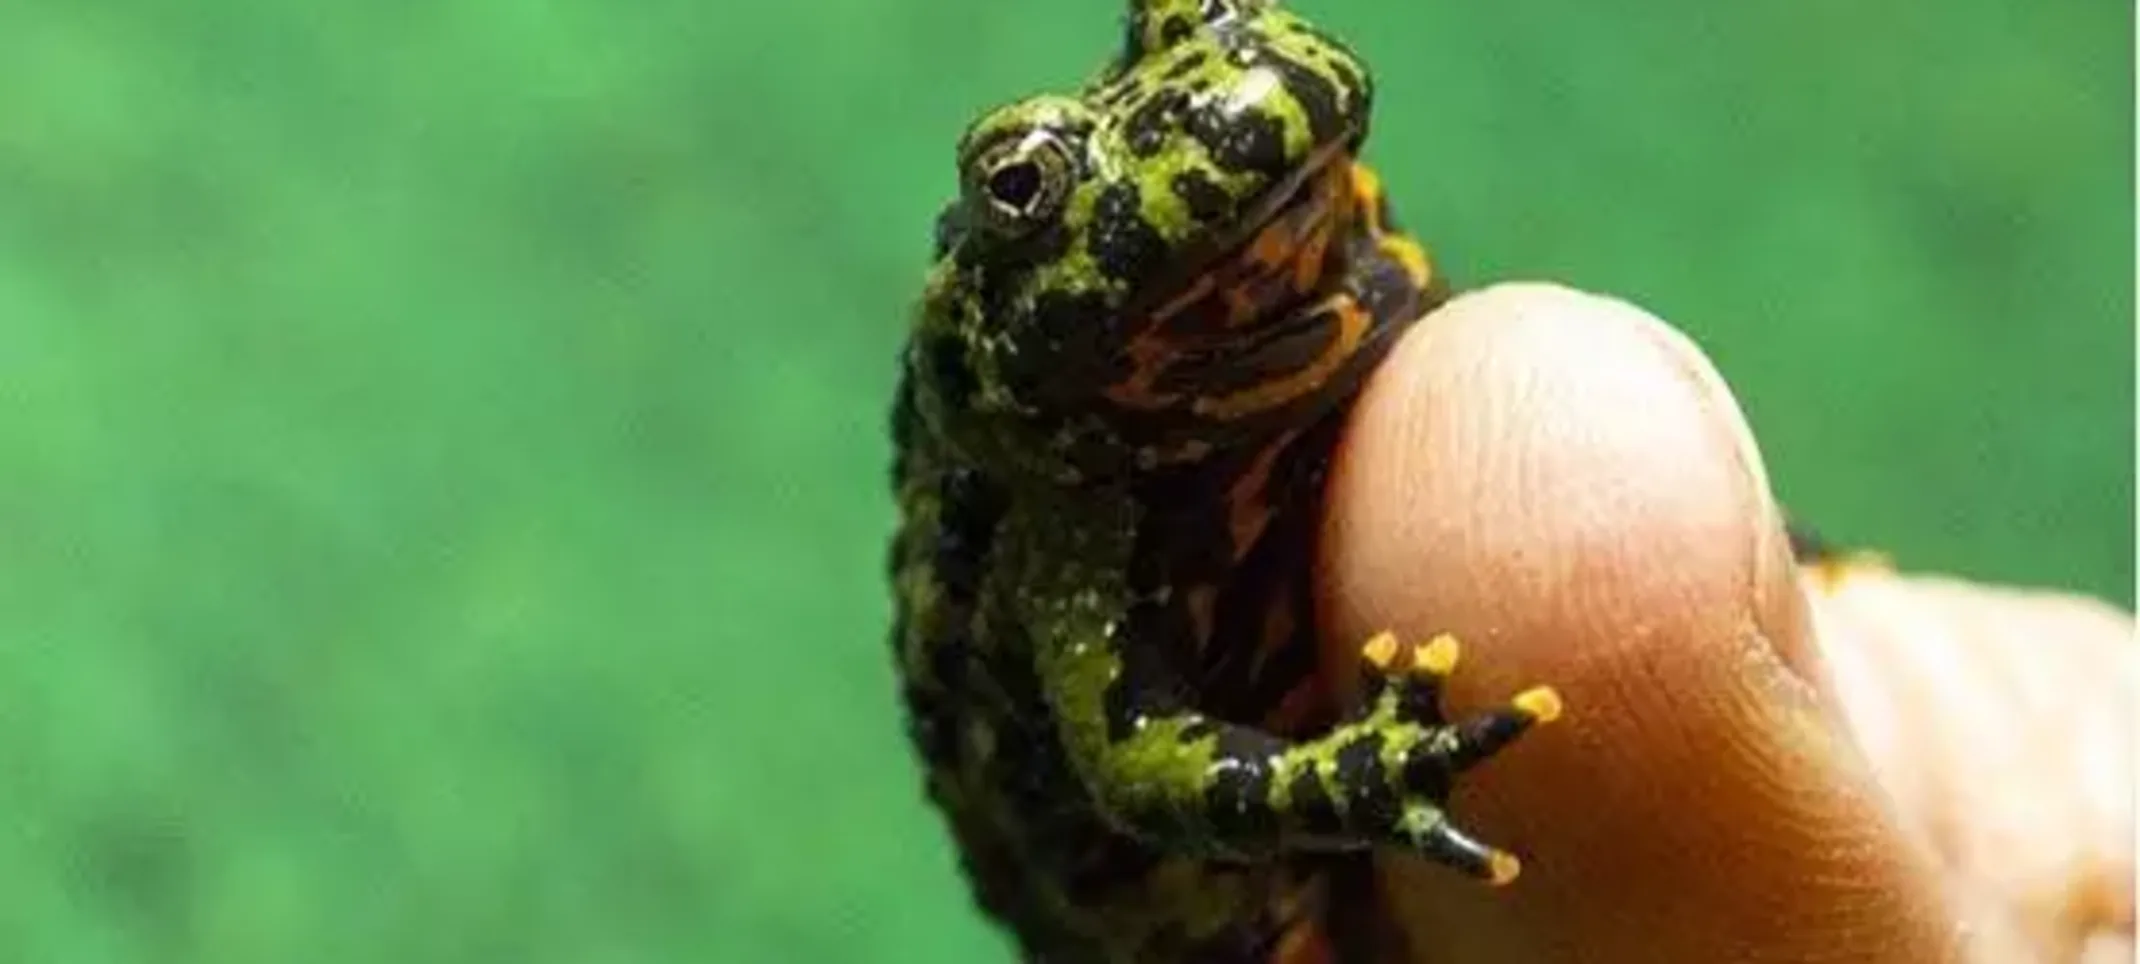 Fang, Fire-Bellied Toad